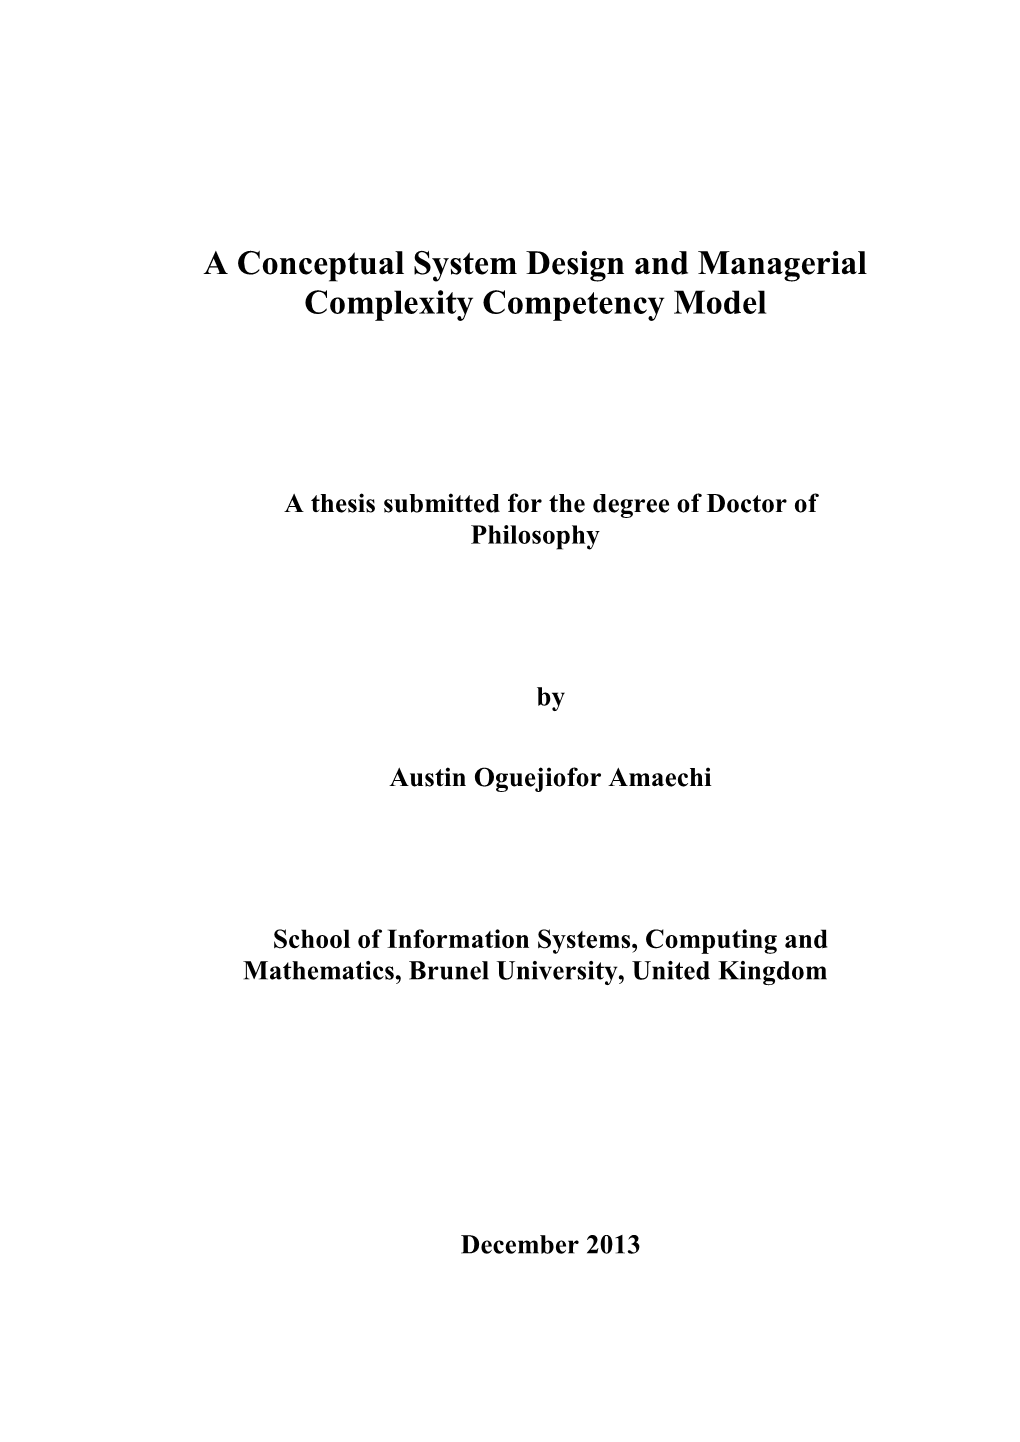 A Conceptual System Design and Managerial Complexity Competency Model